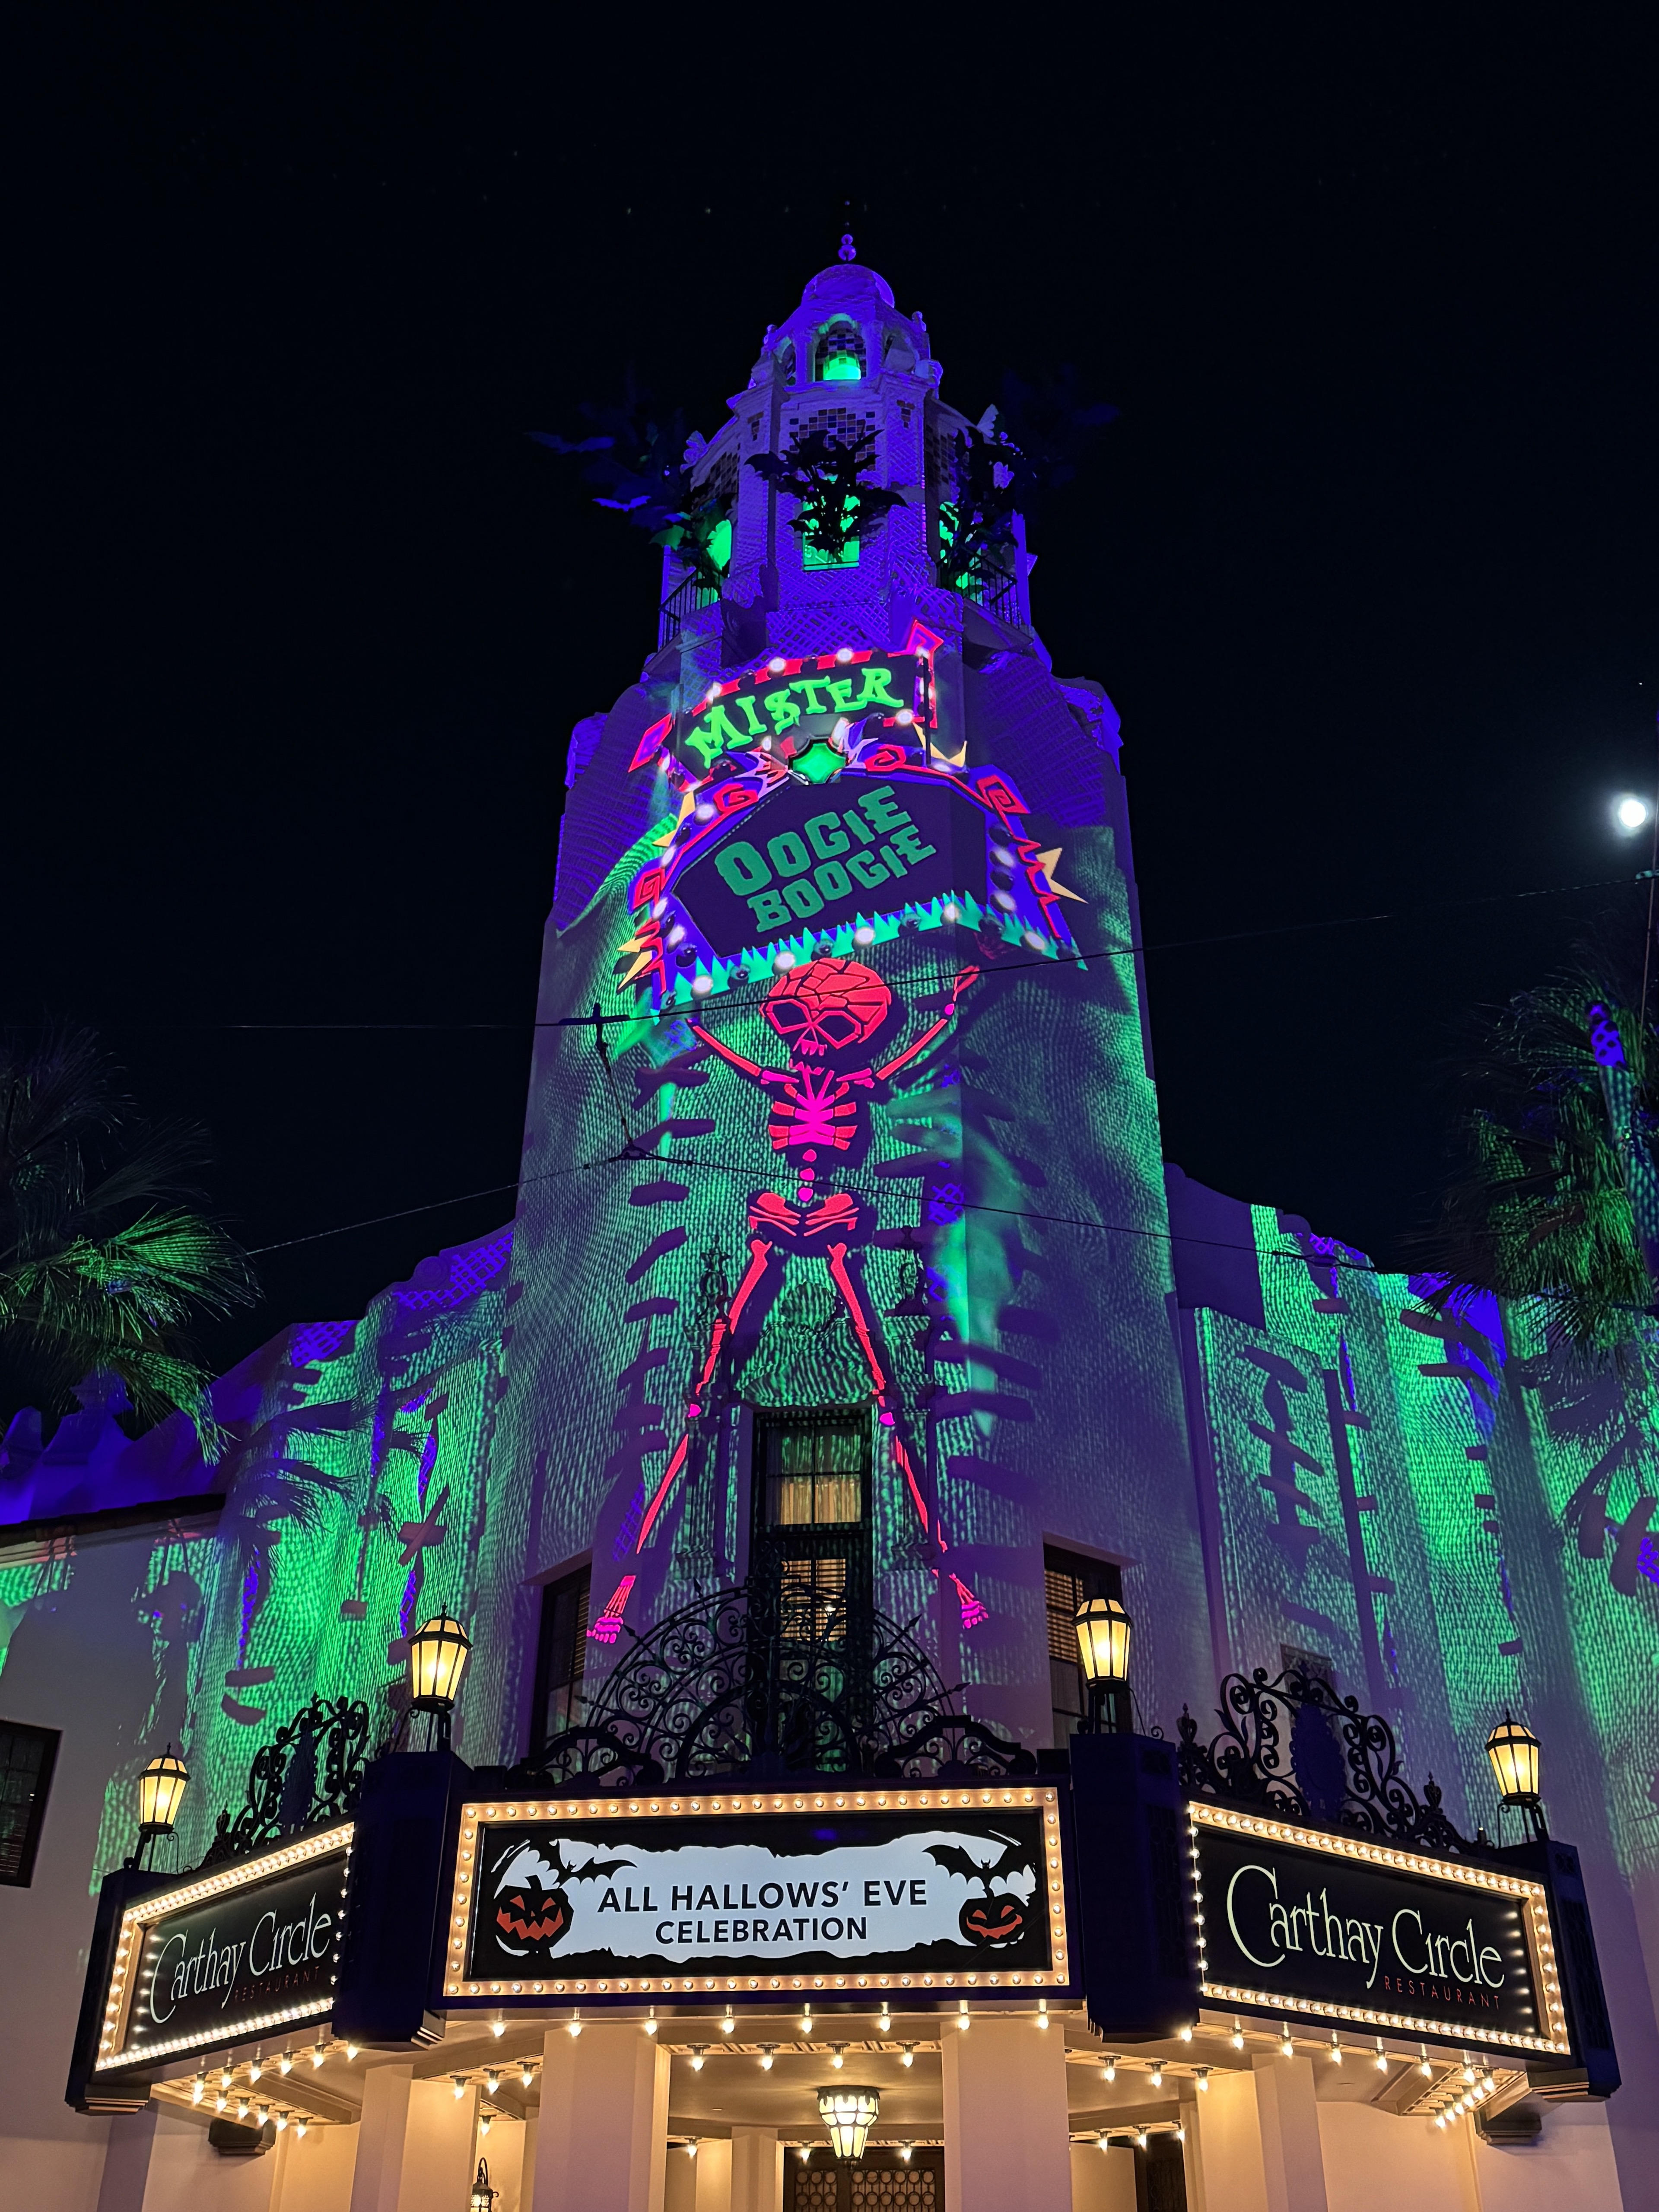 Carthay Circle with Oogie Boogie projection taken with iPhone 15 Pro main camera.